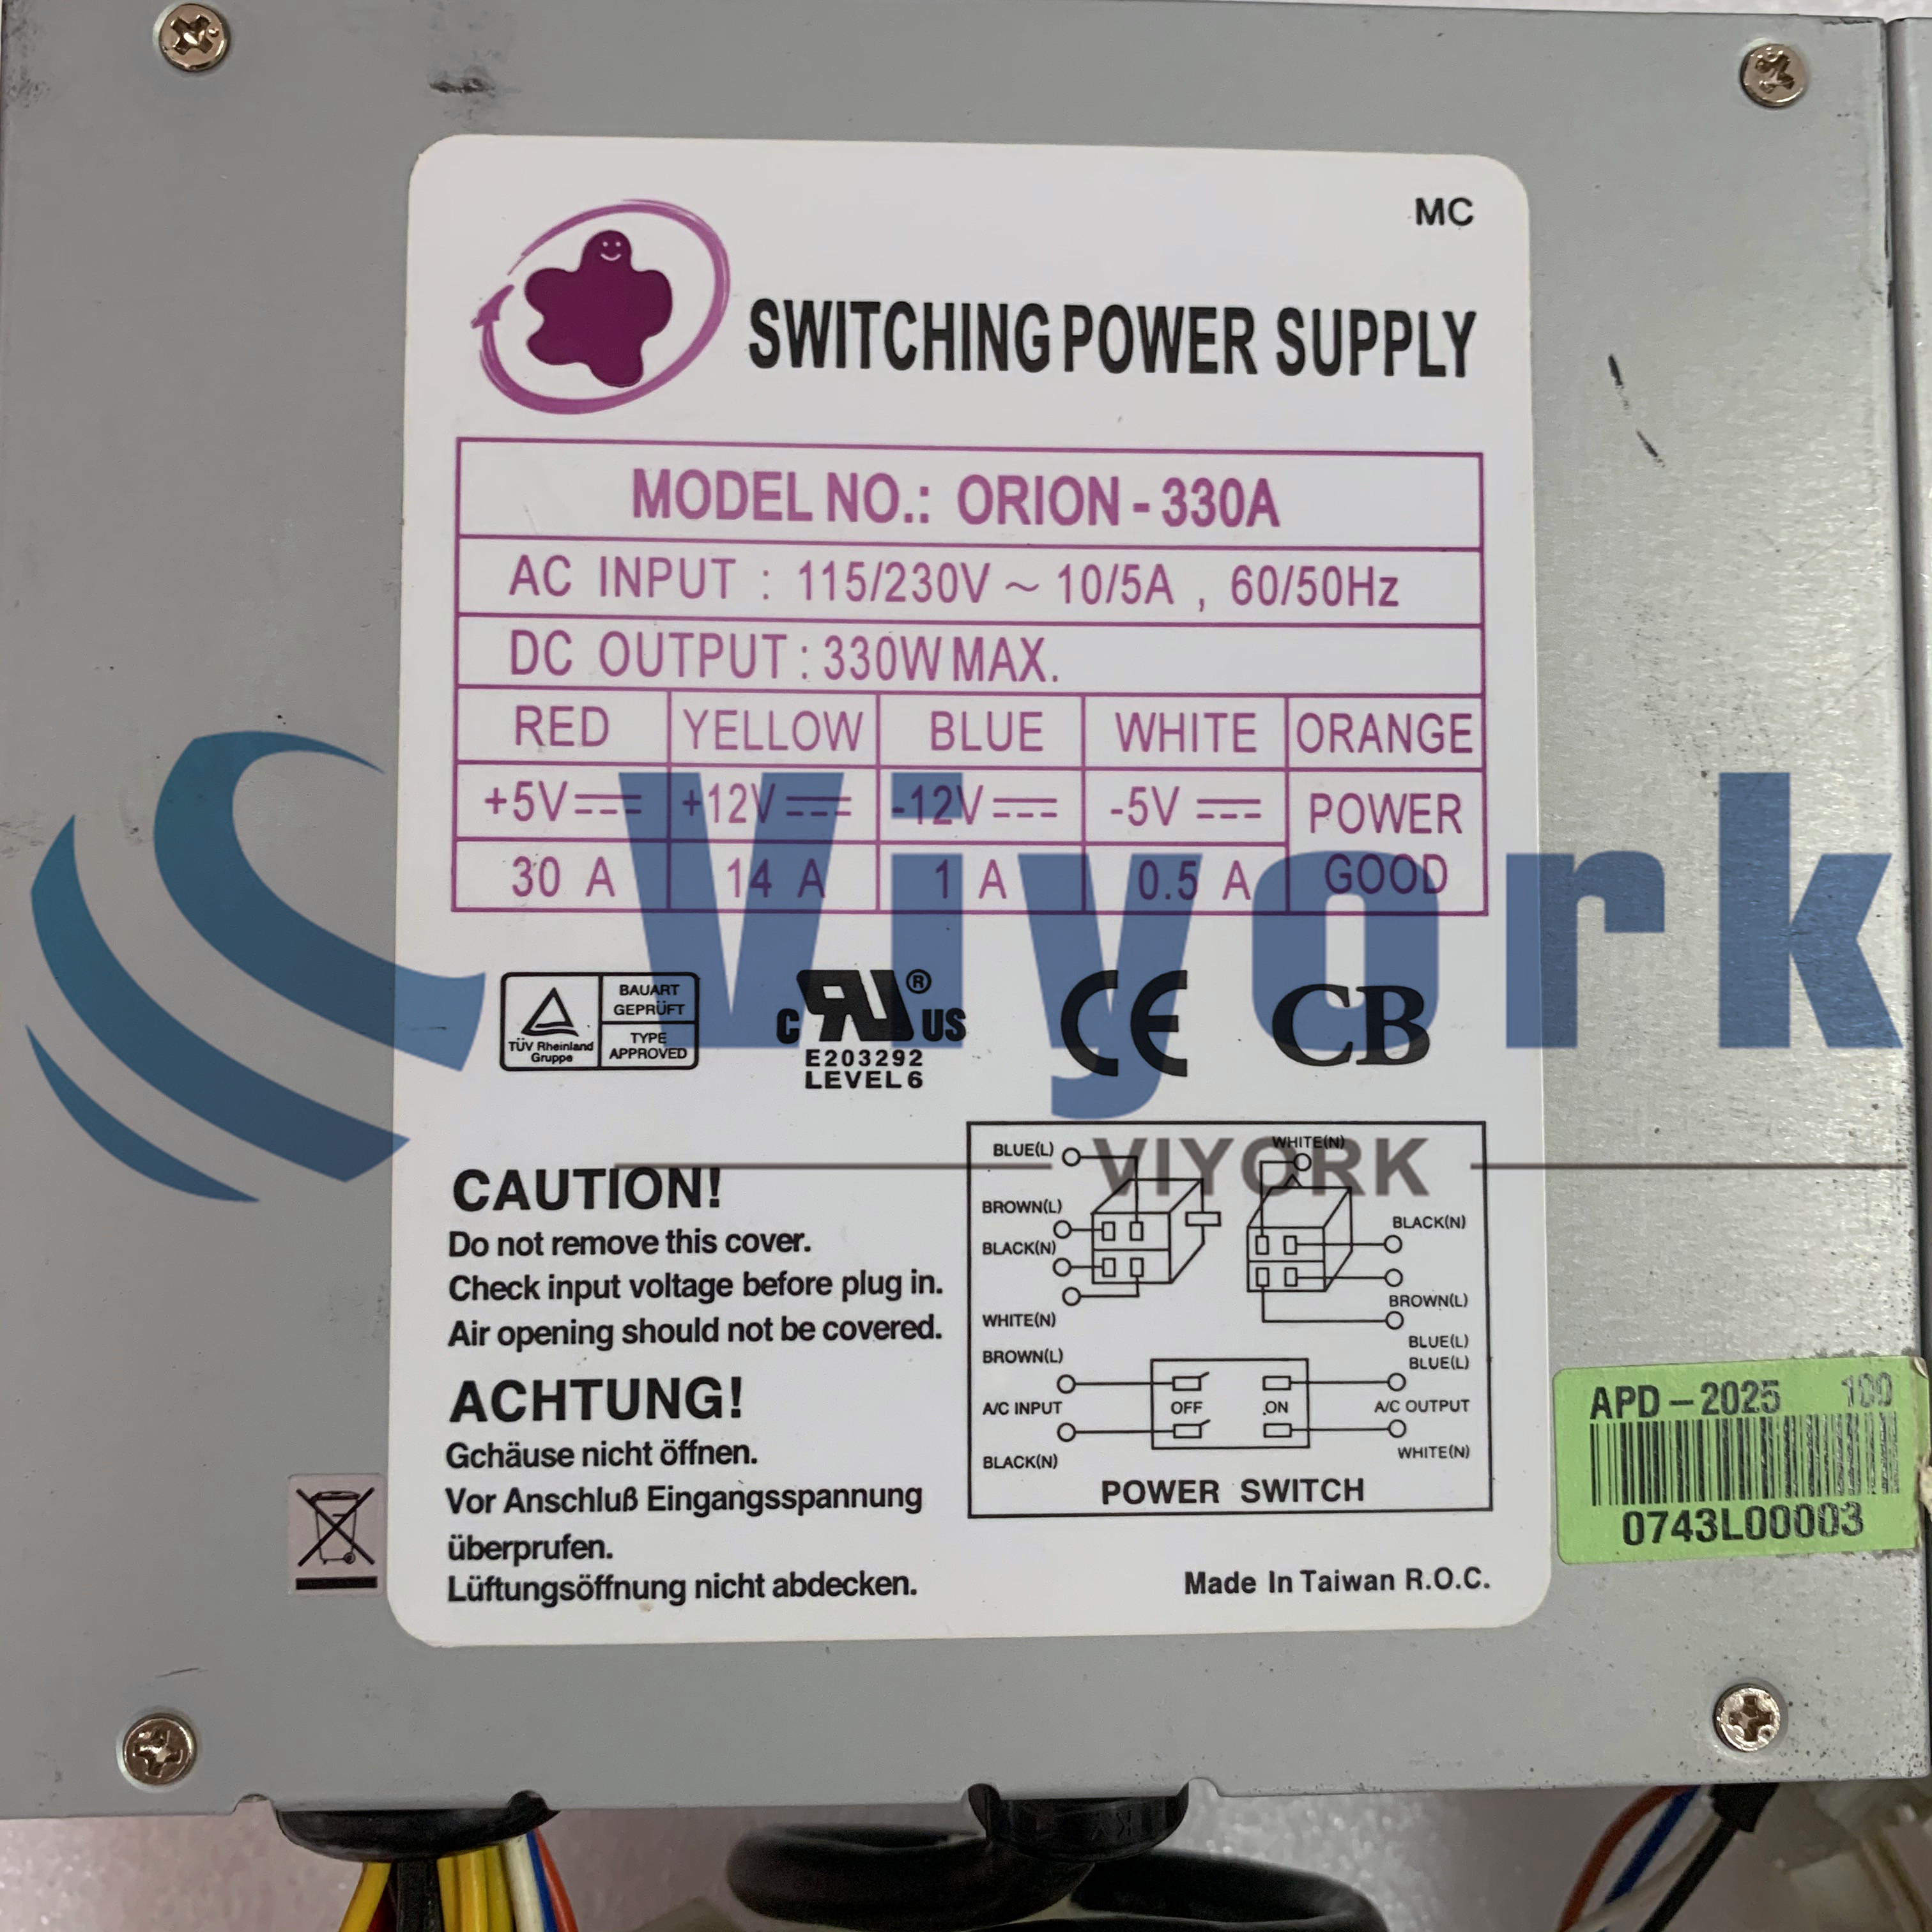 SWITCHING POWER SUPPLY ORION-330A